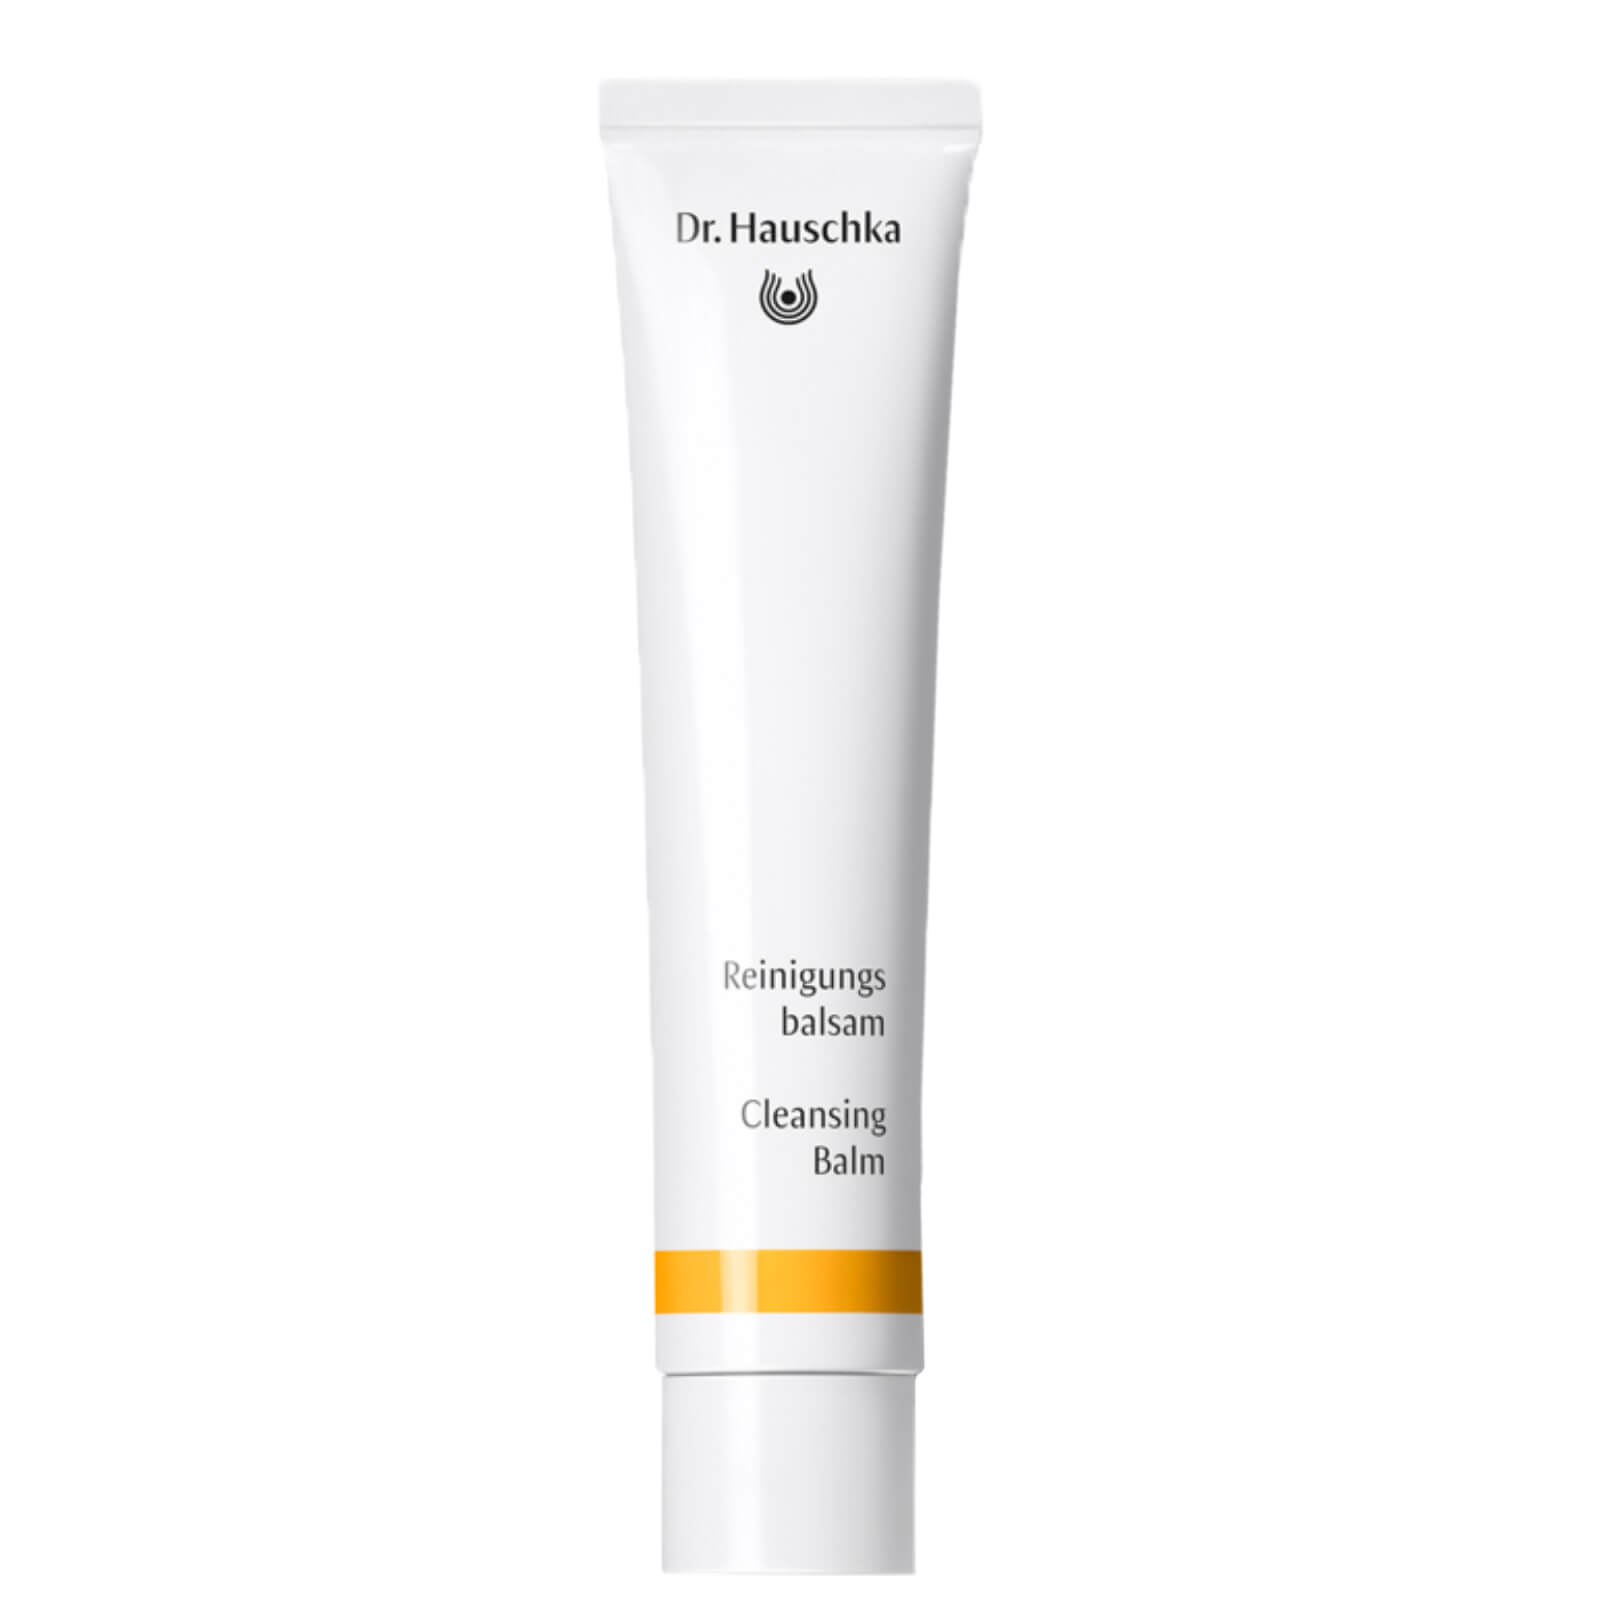 Image of Dr. Hauschka Cleansing Balm 75ml